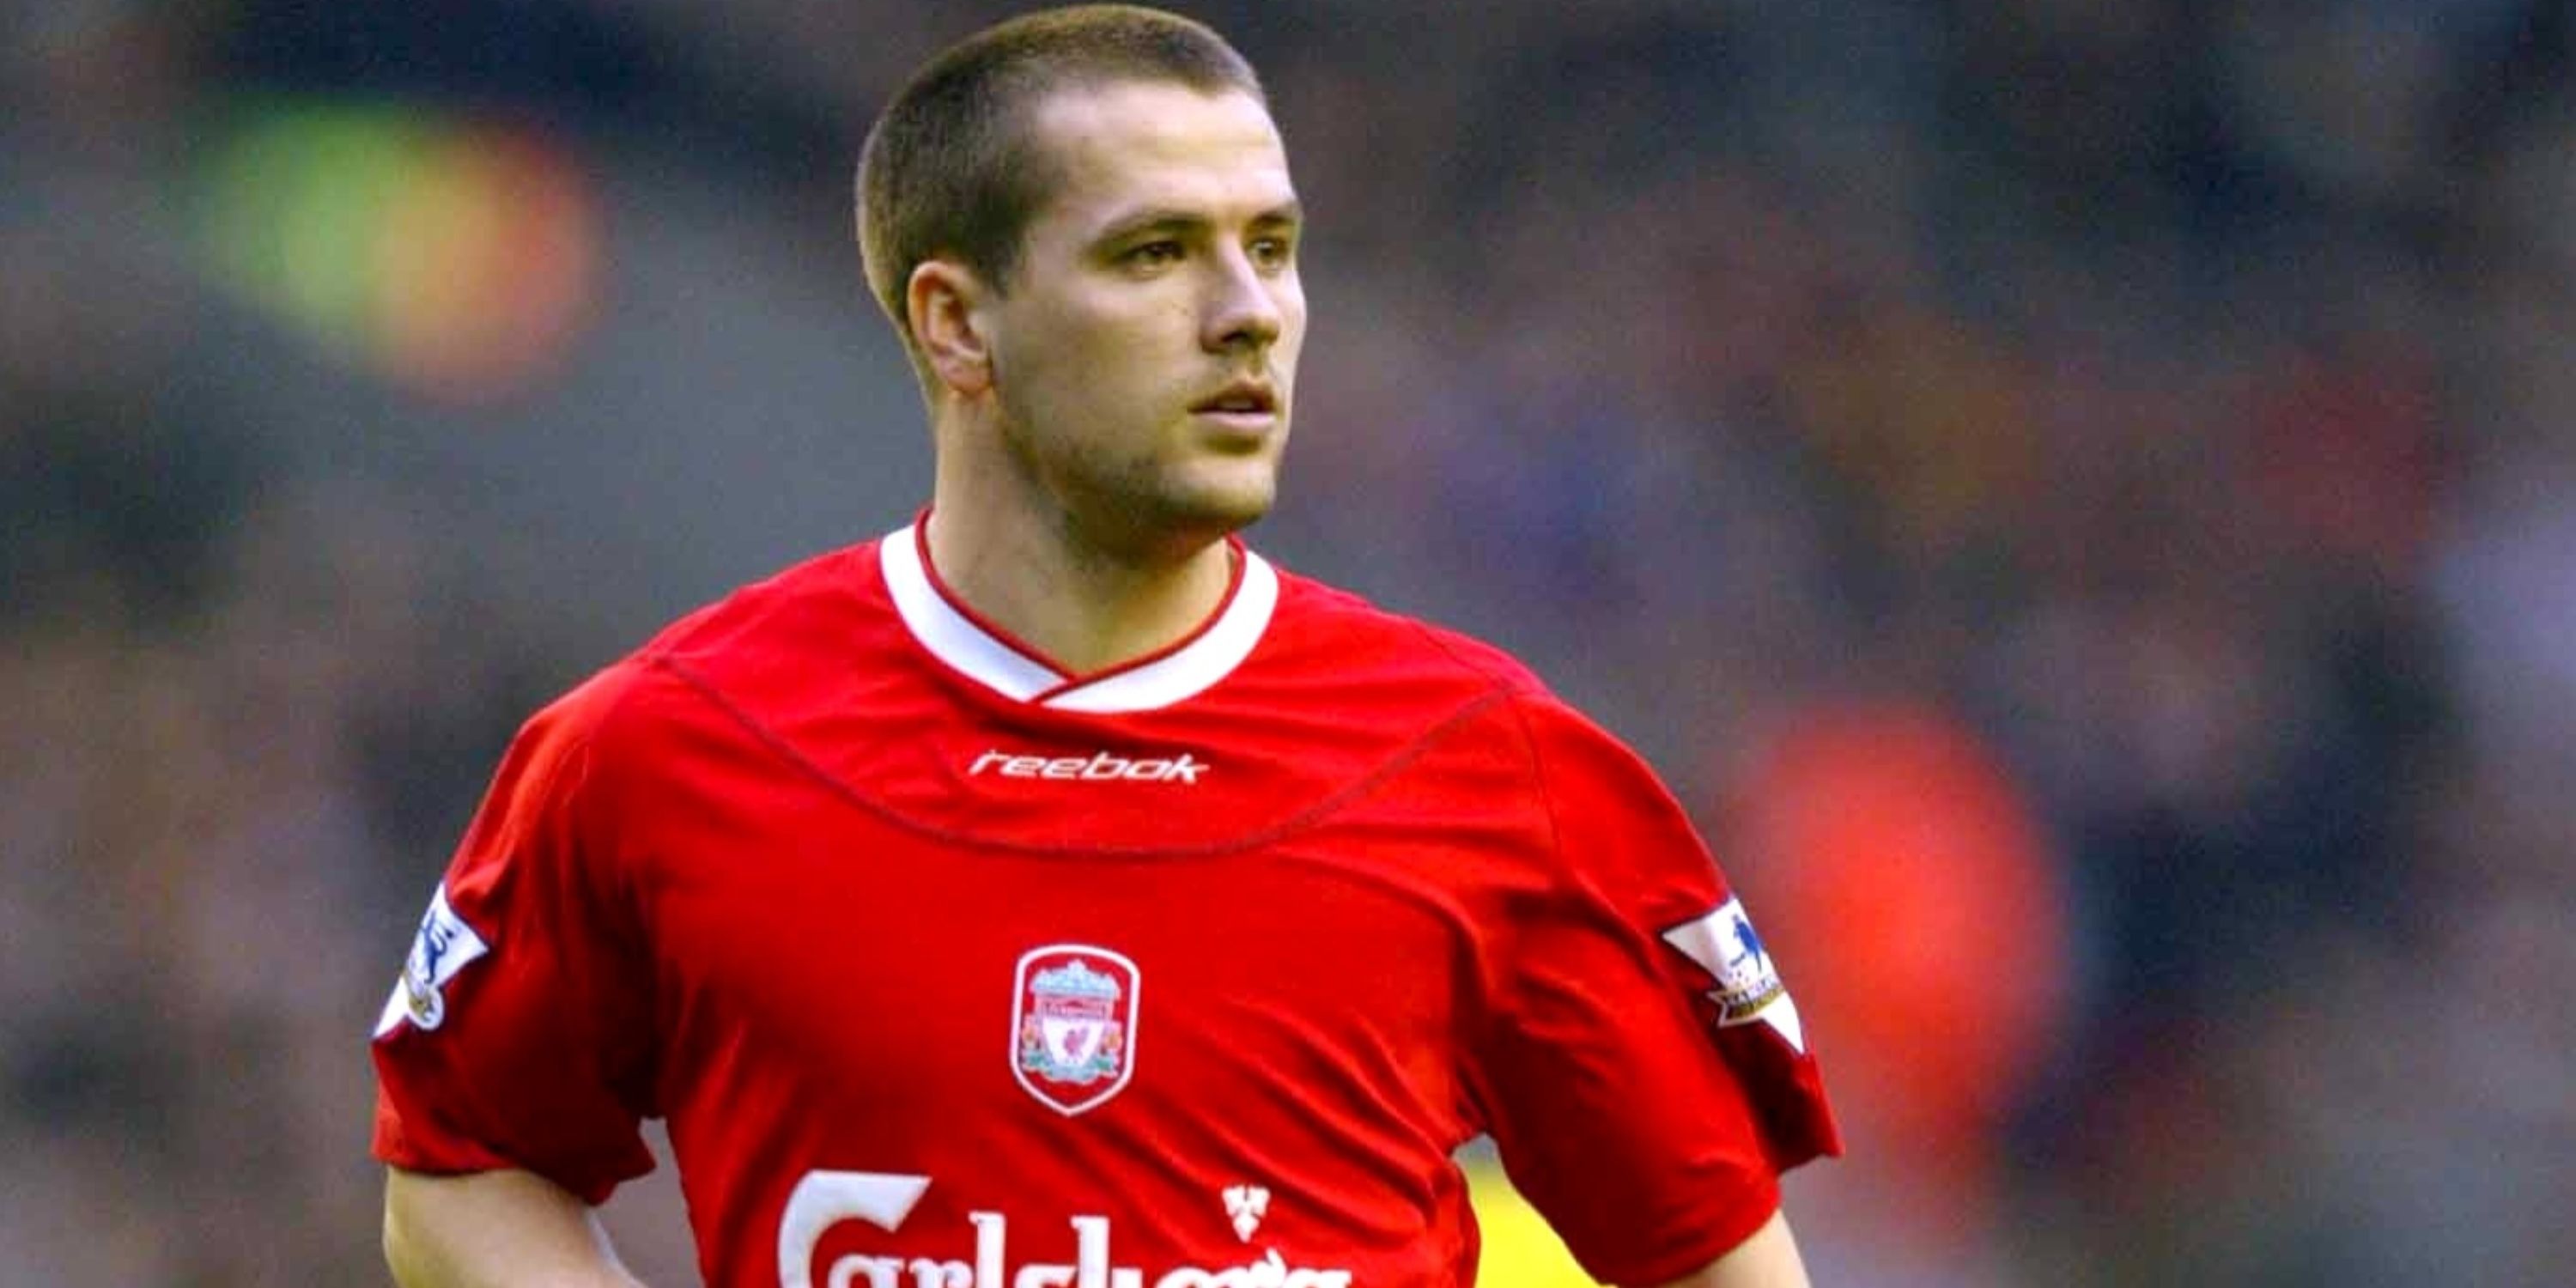 Michael Owen beat insane list of players to win 2001 Ballon d'Or with Liverpool